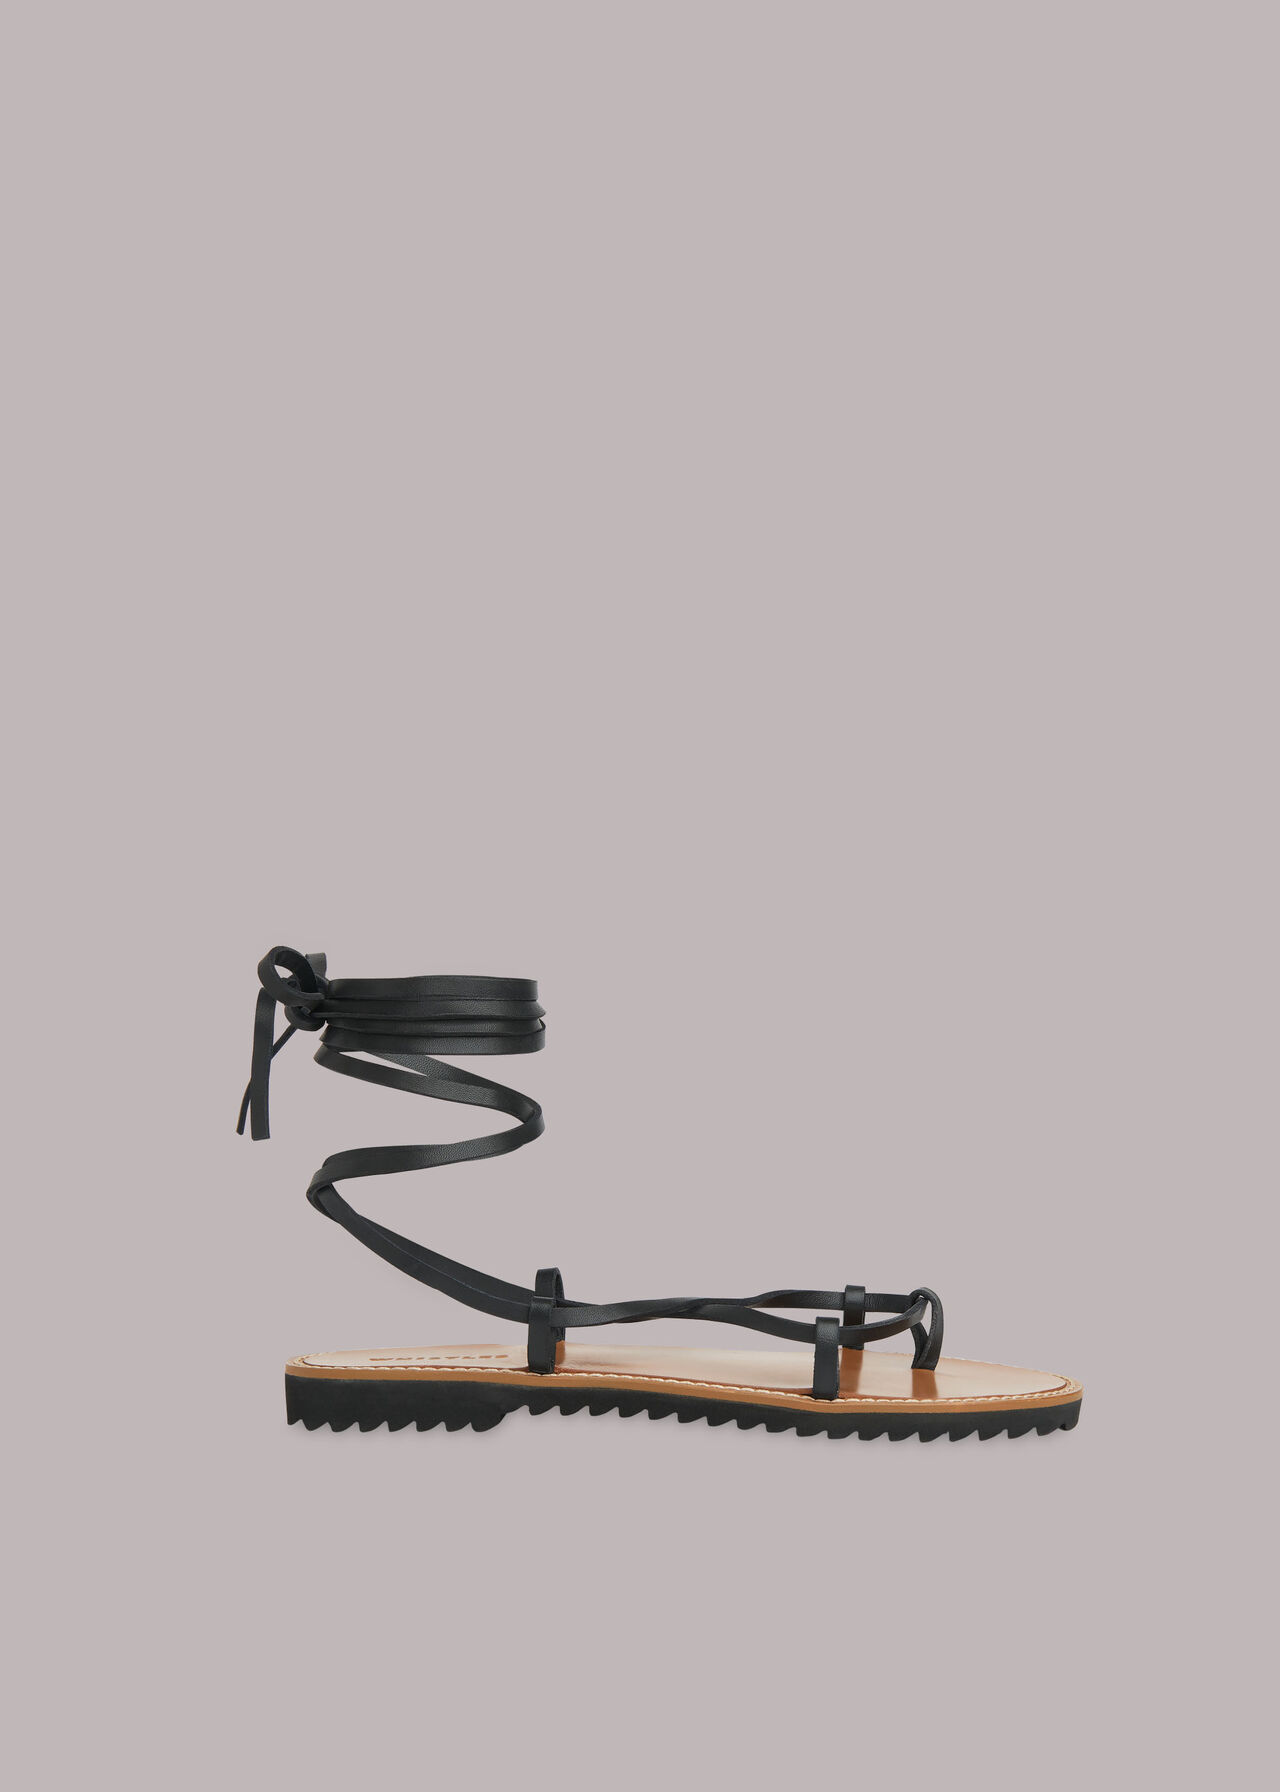 Willow Strappy Tie Sandal